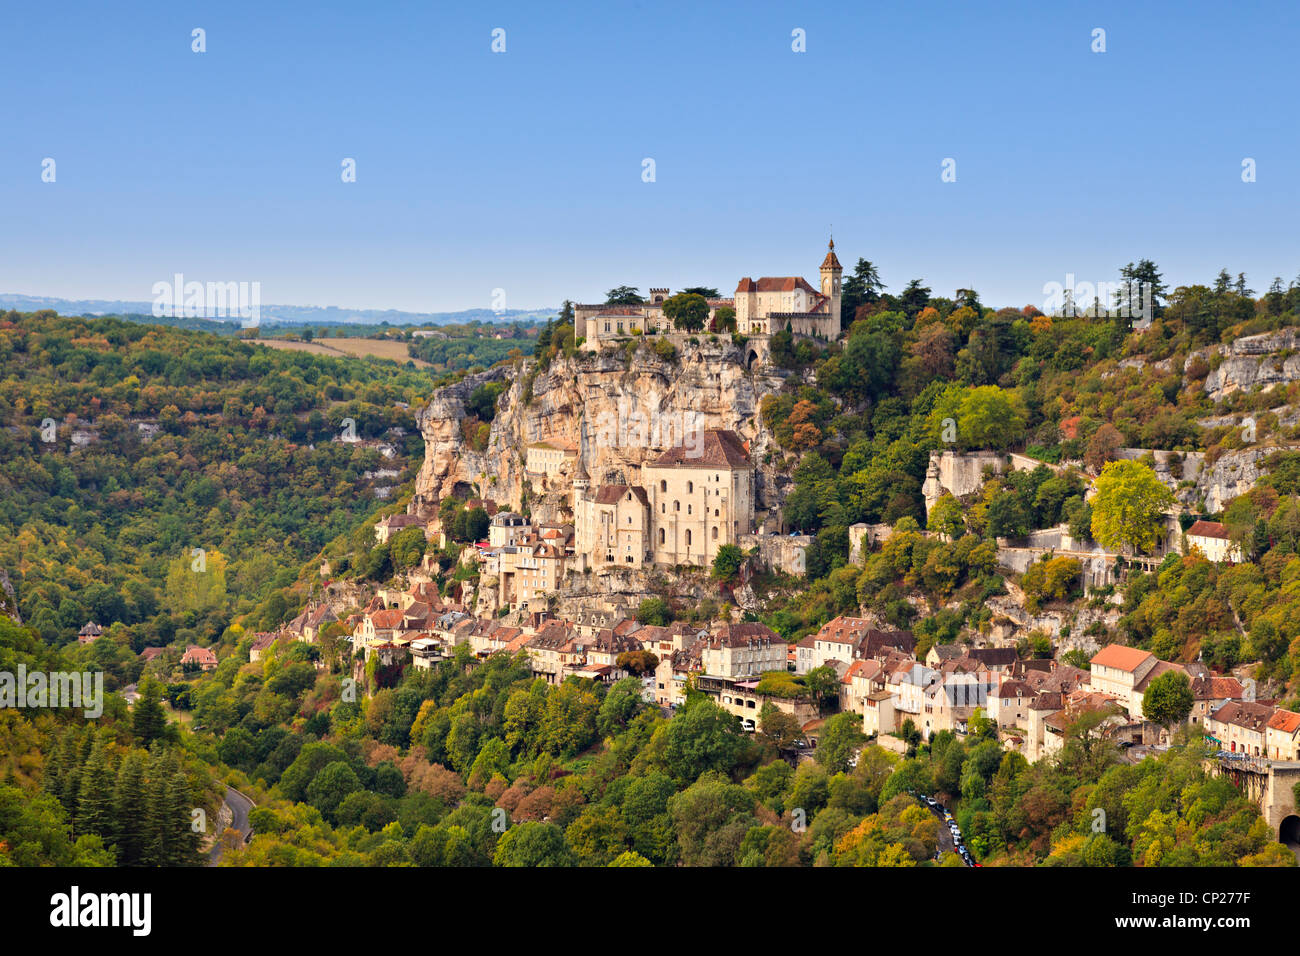 The medieval town of Rocamadour, in the Dordogne Valley, Midi-Pyrenees, France. Stock Photo